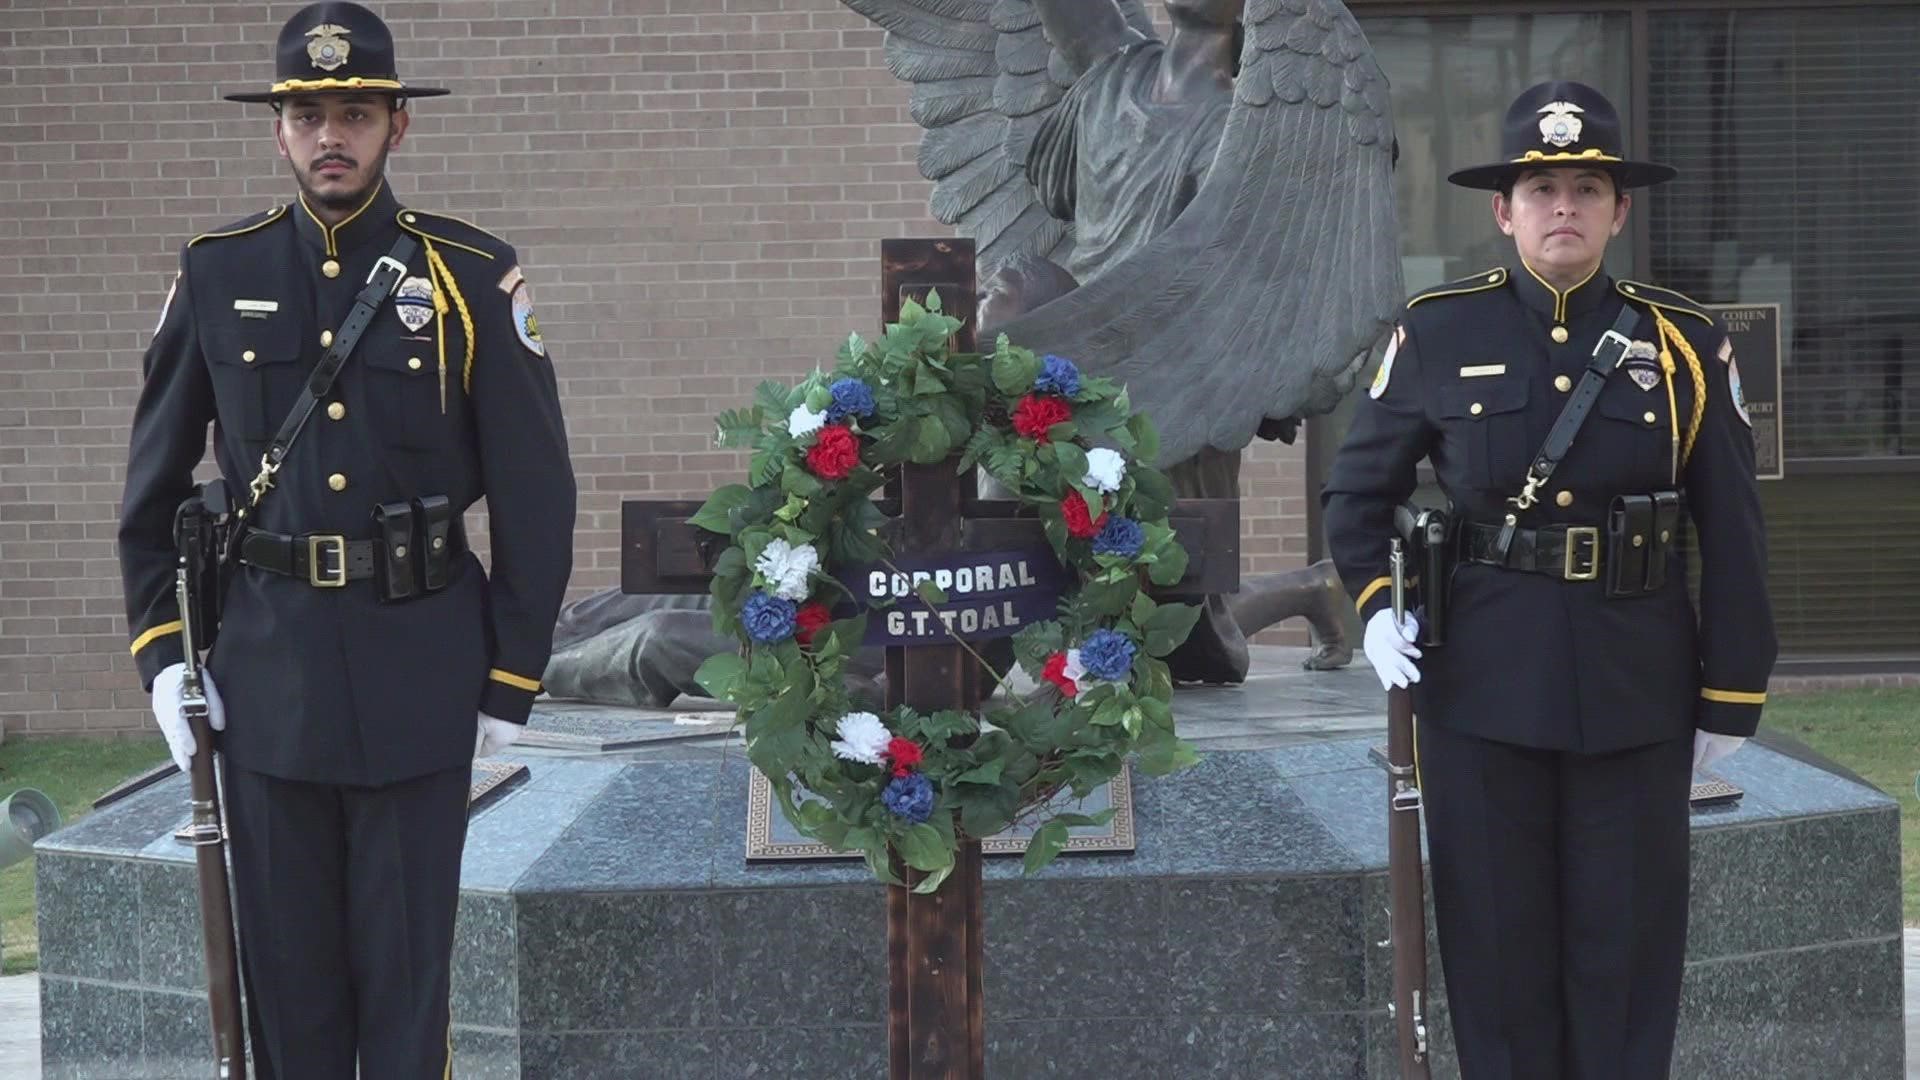 The department does the ceremony every year to remember Cpl. G.T. Toal's life.